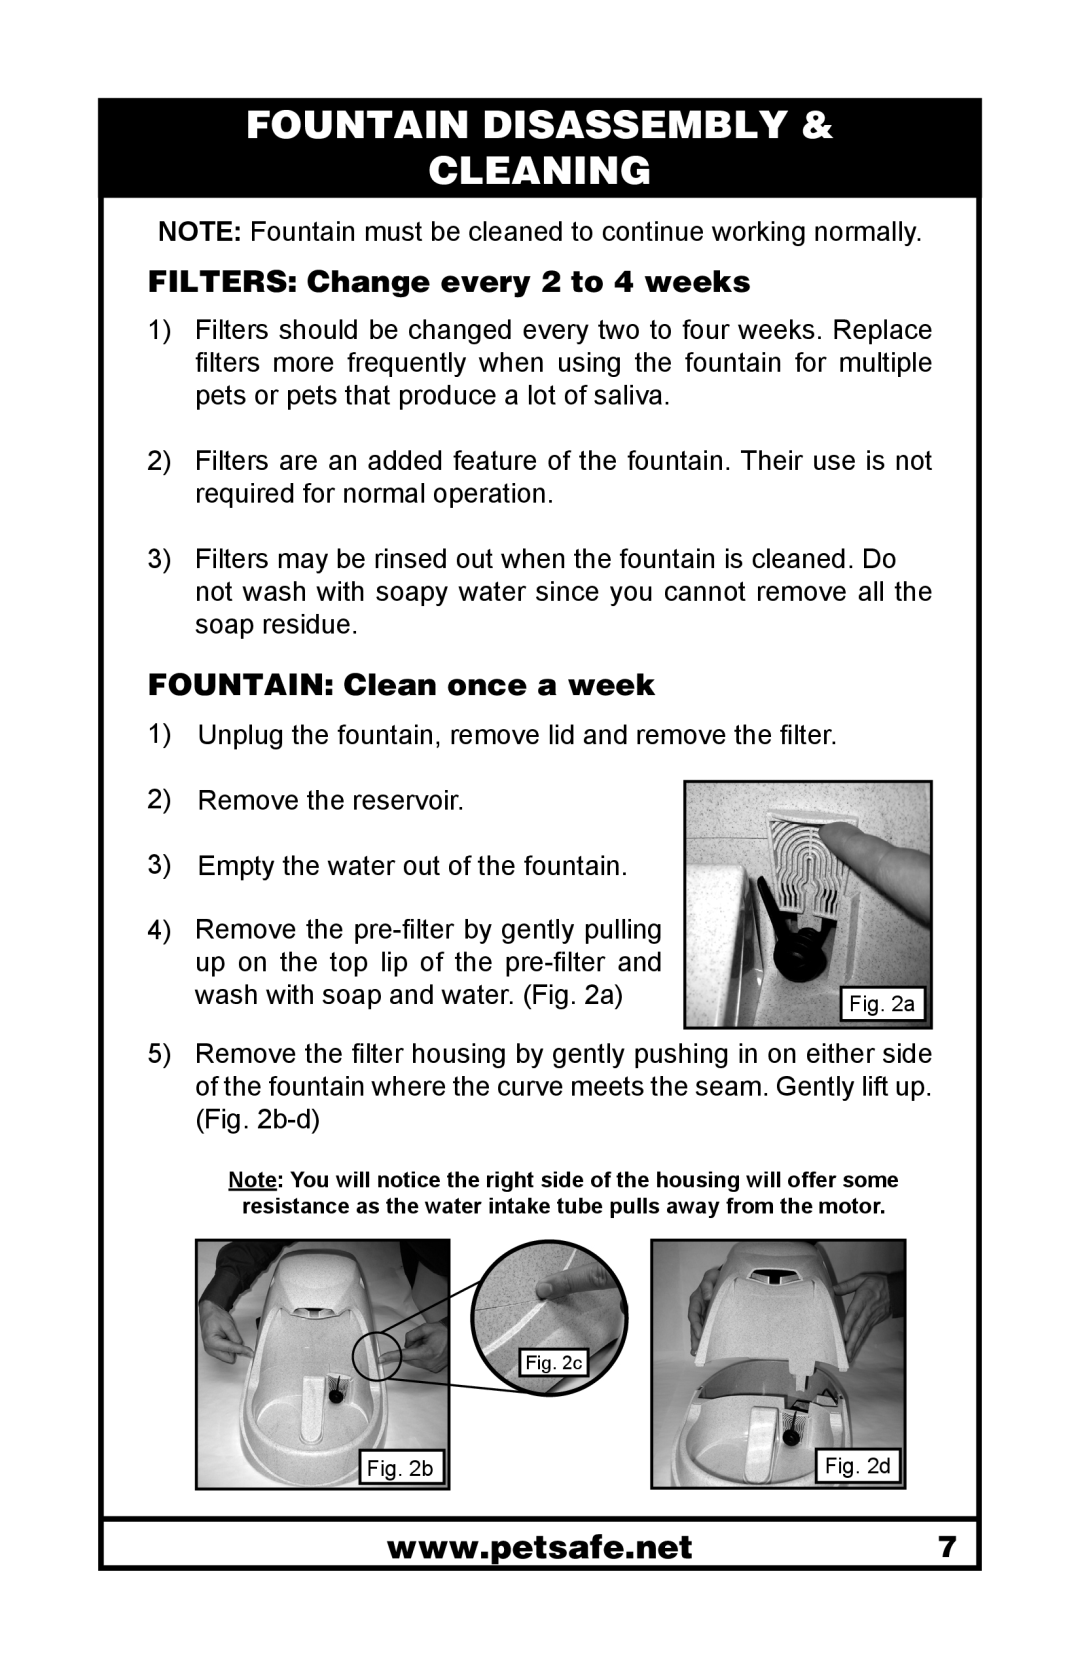 Petsafe 400-1255-19 Fountain Disassembly Cleaning, FILTERS Change every 2 to 4 weeks, FOUNTAIN Clean once a week 